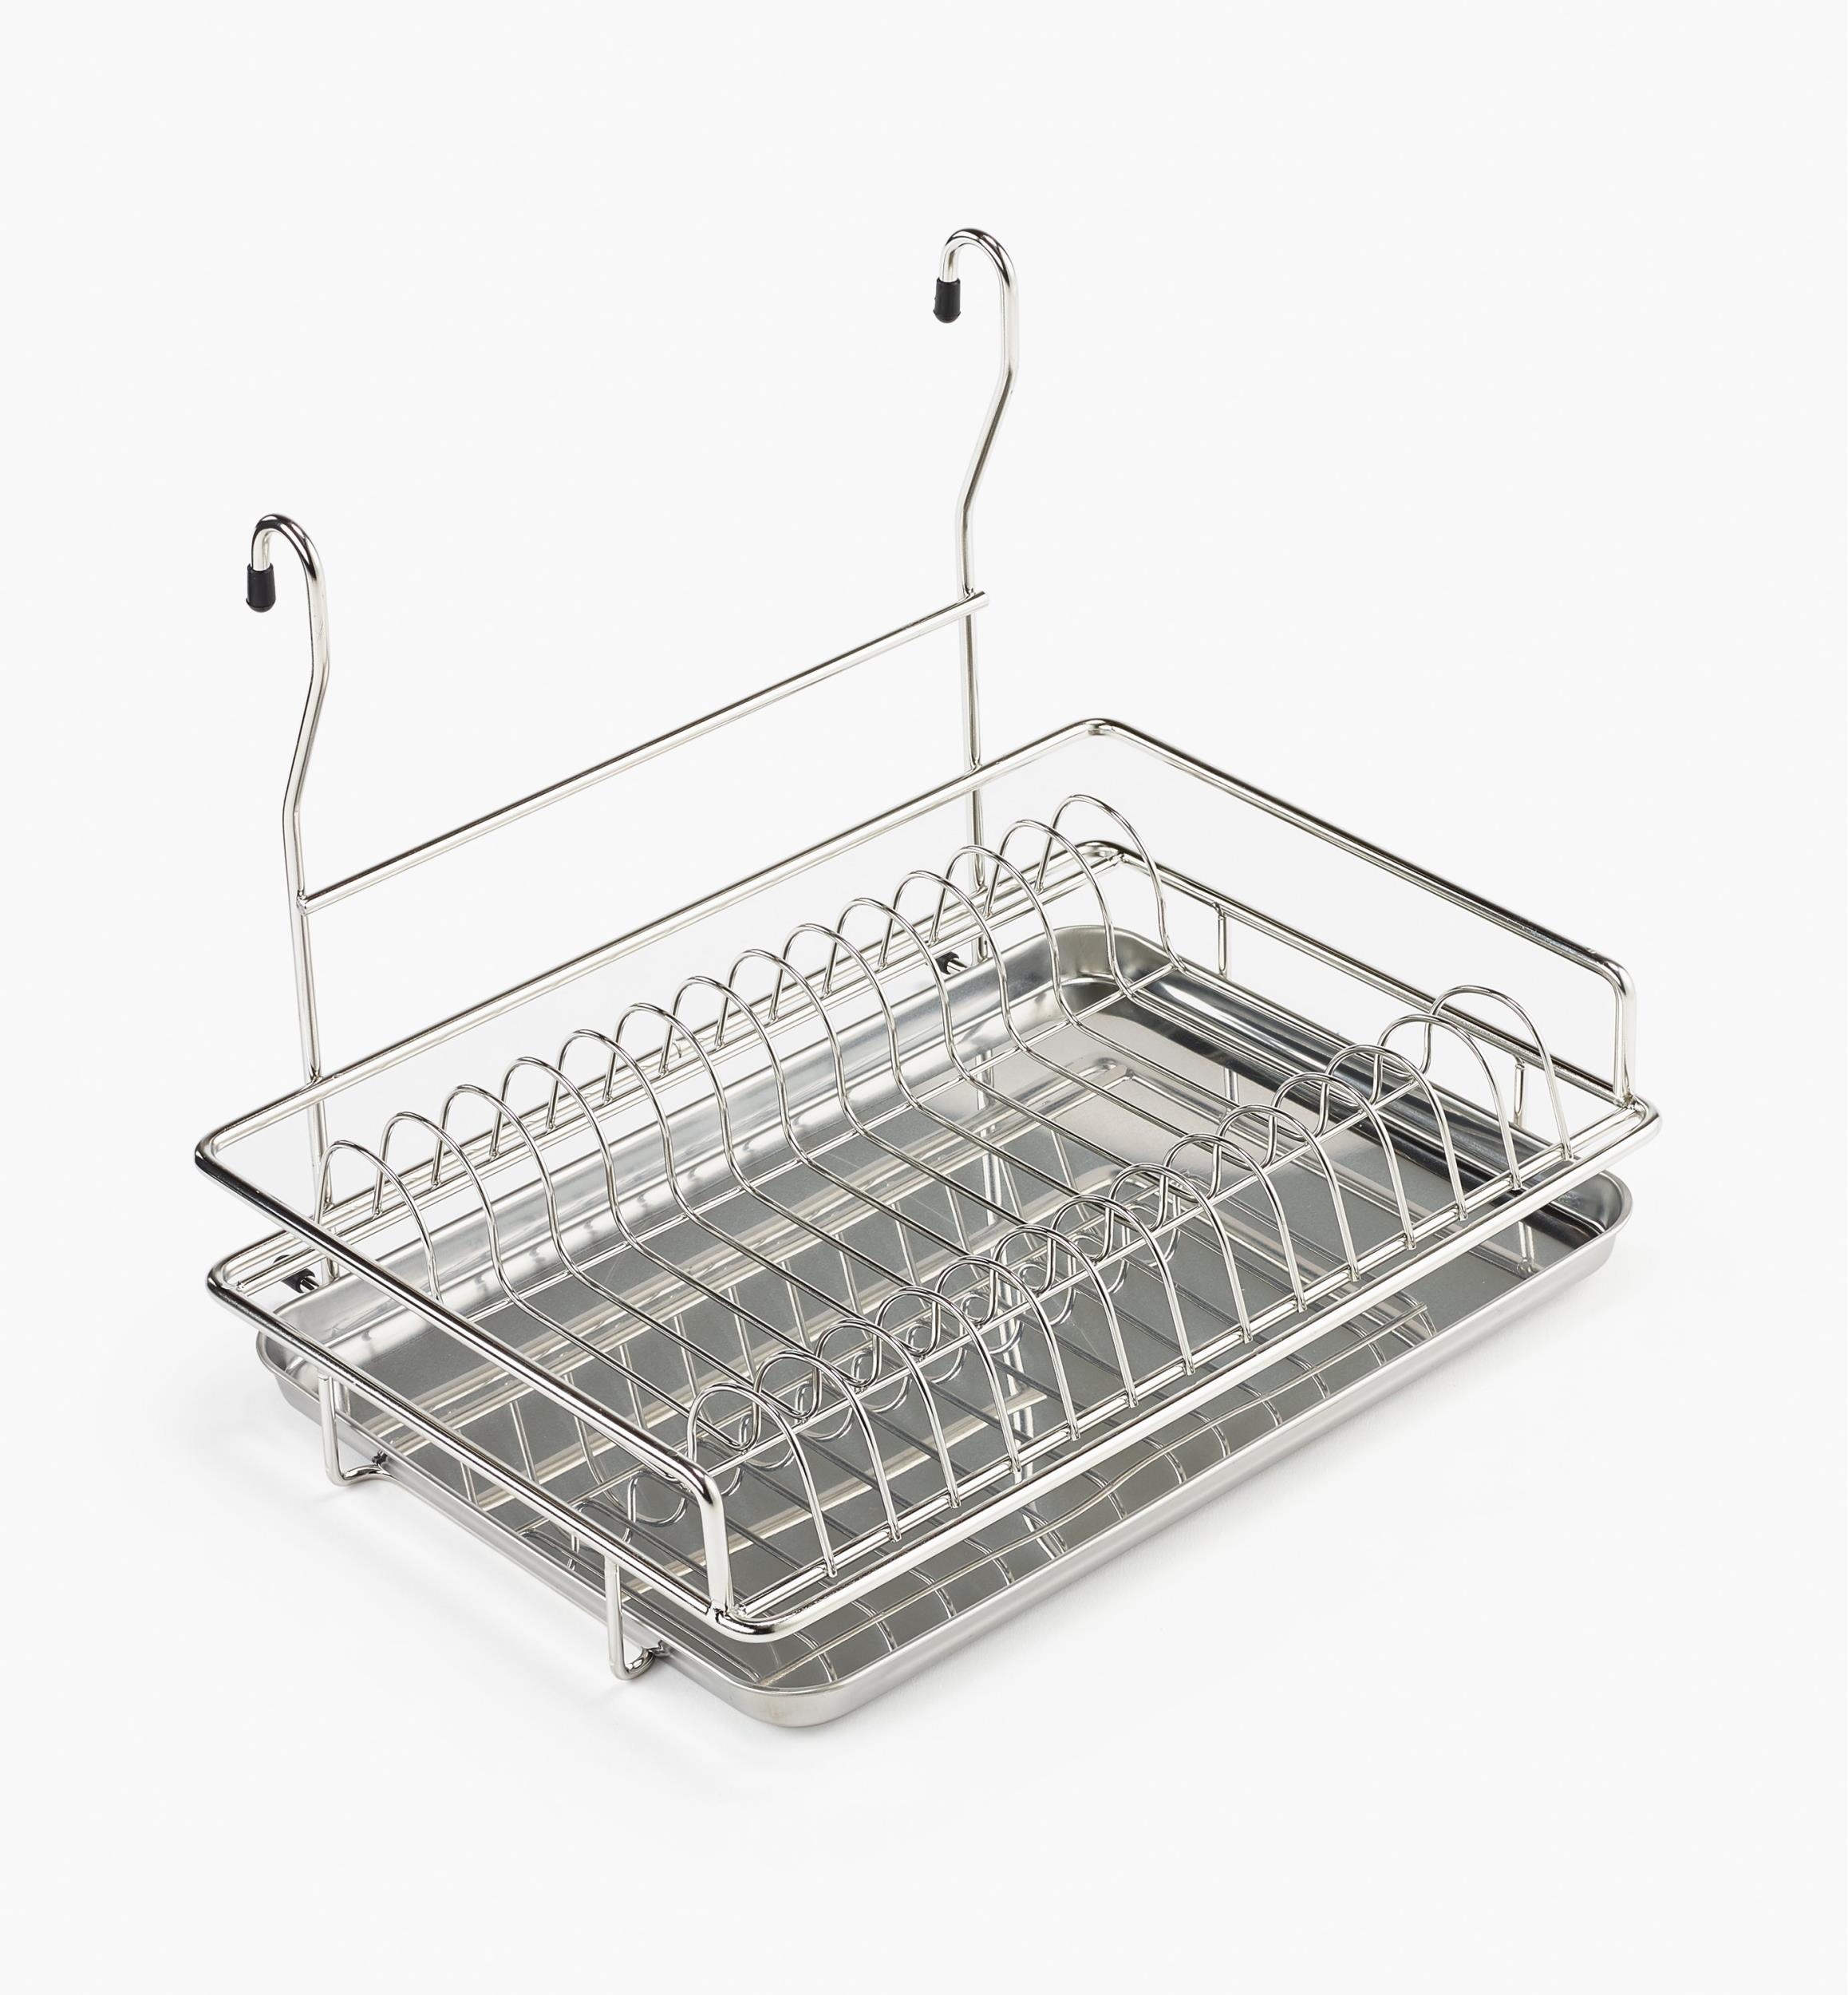 Dish Racks for the Wall-Mount Storage System - Lee Valley Tools